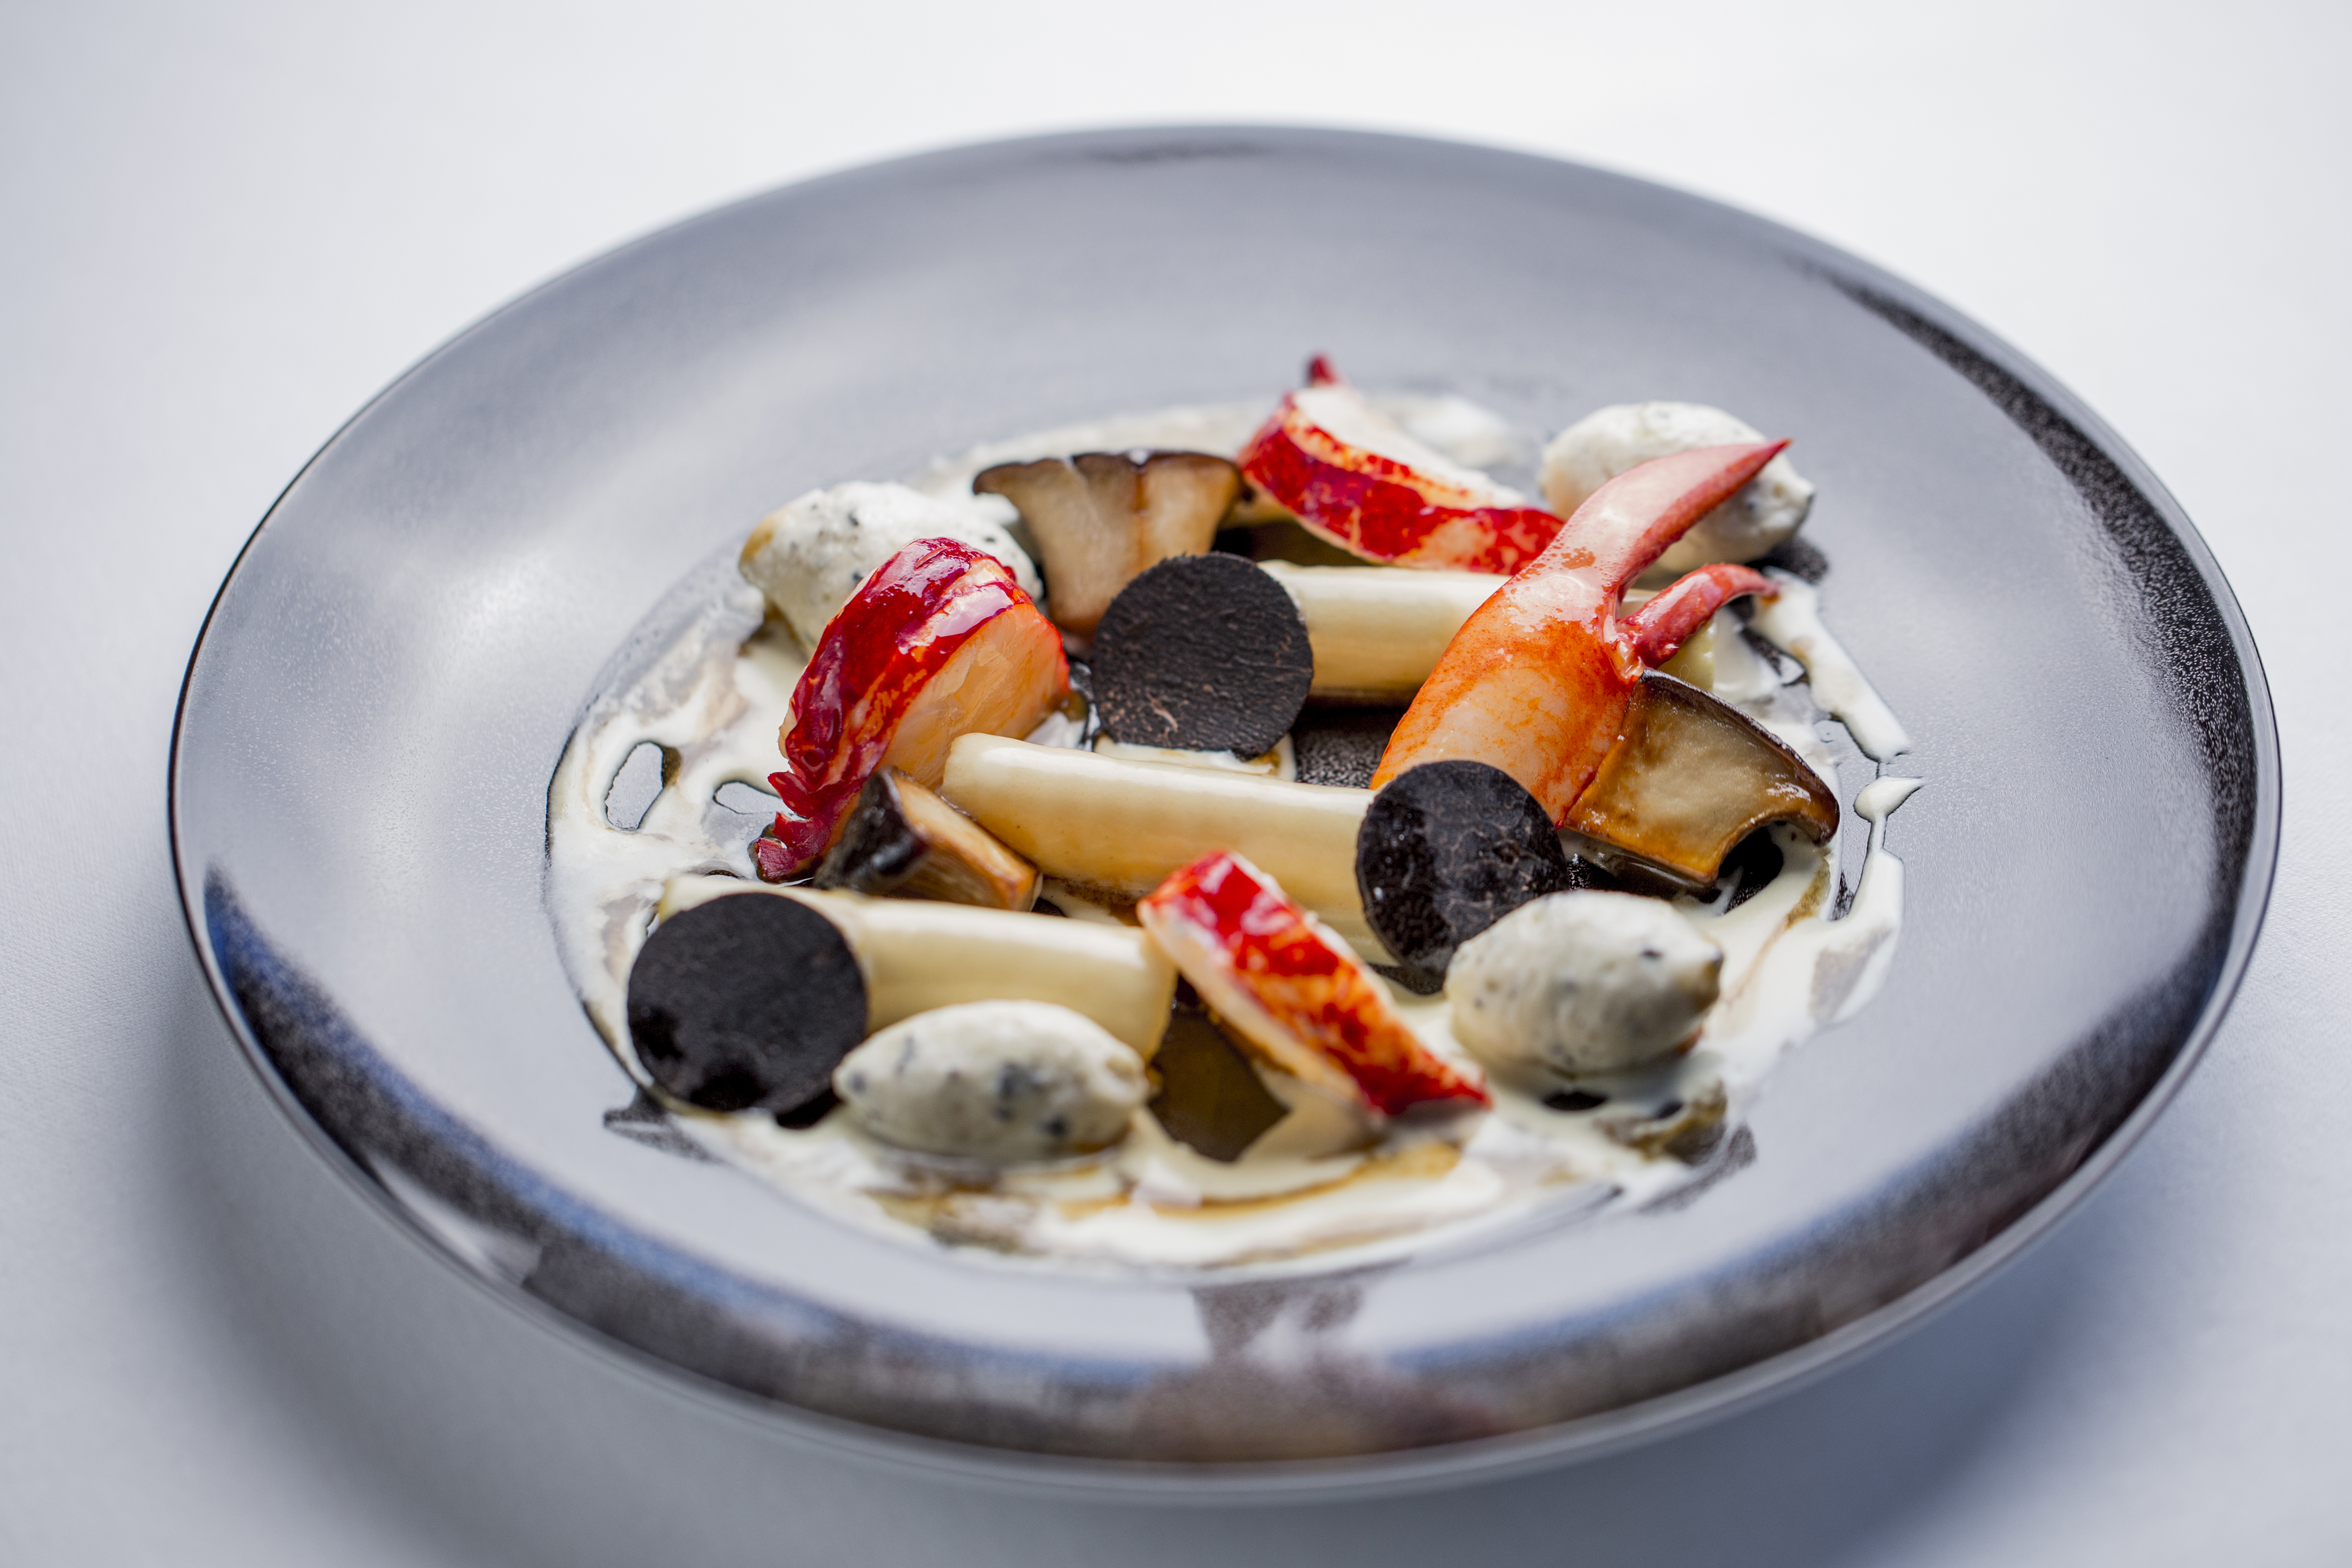 Saute gourmand of Lobster by Jean-Philippe Blondet, executive chef at Alain Ducasse at The Dorchester ®pierremonetta 